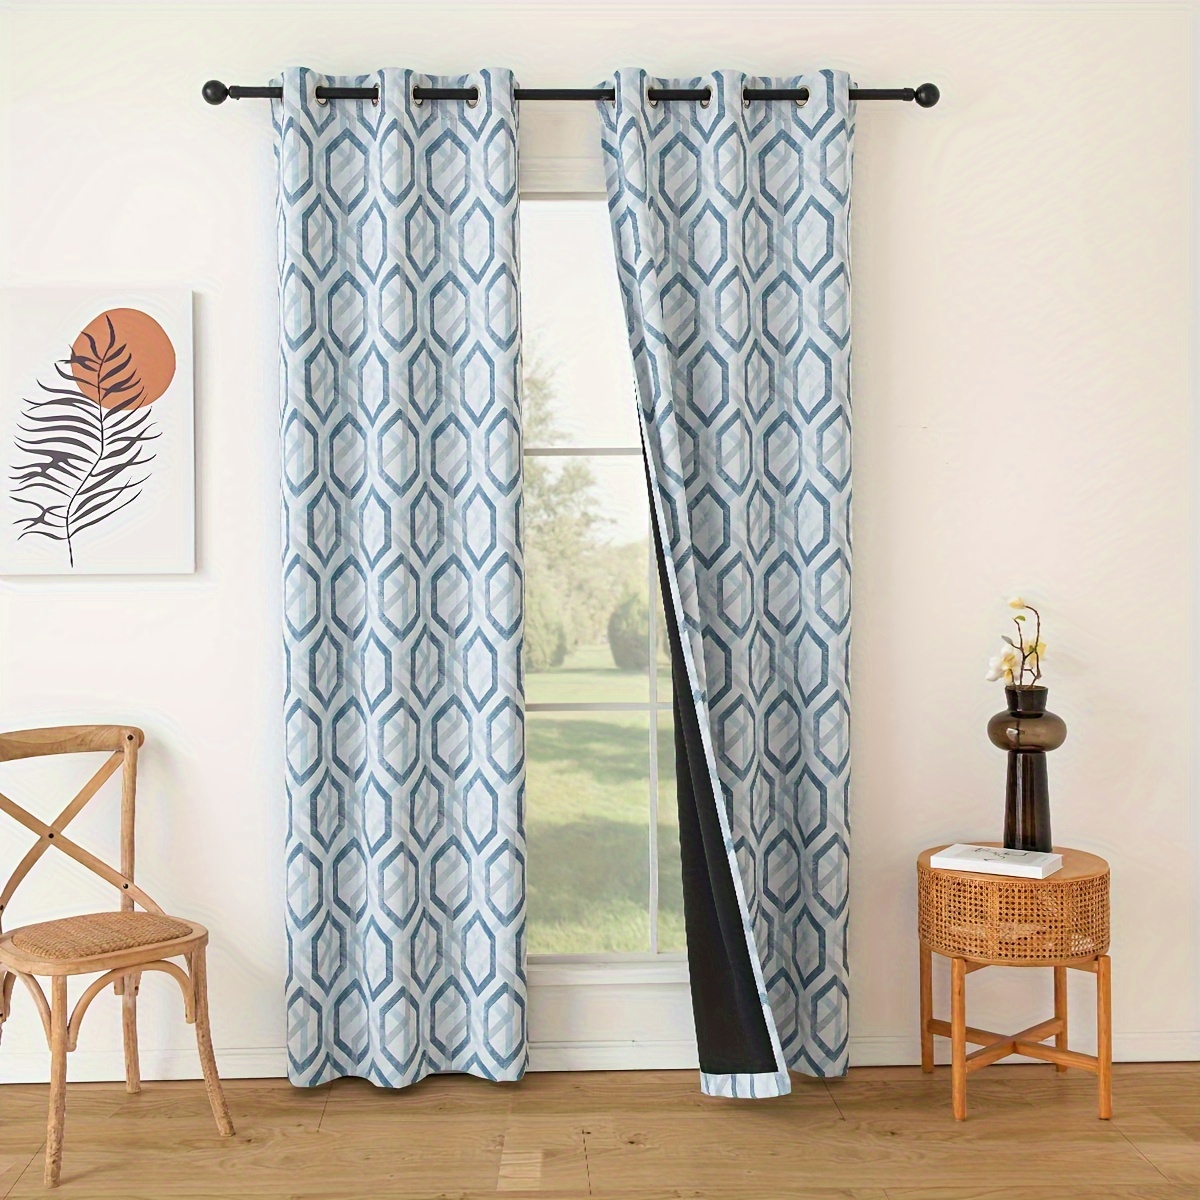 

2pcs Geometric Pattern Insulated Sunscreen Curtains Suitable For Bedroom Living Room Balcony Office Home Decor